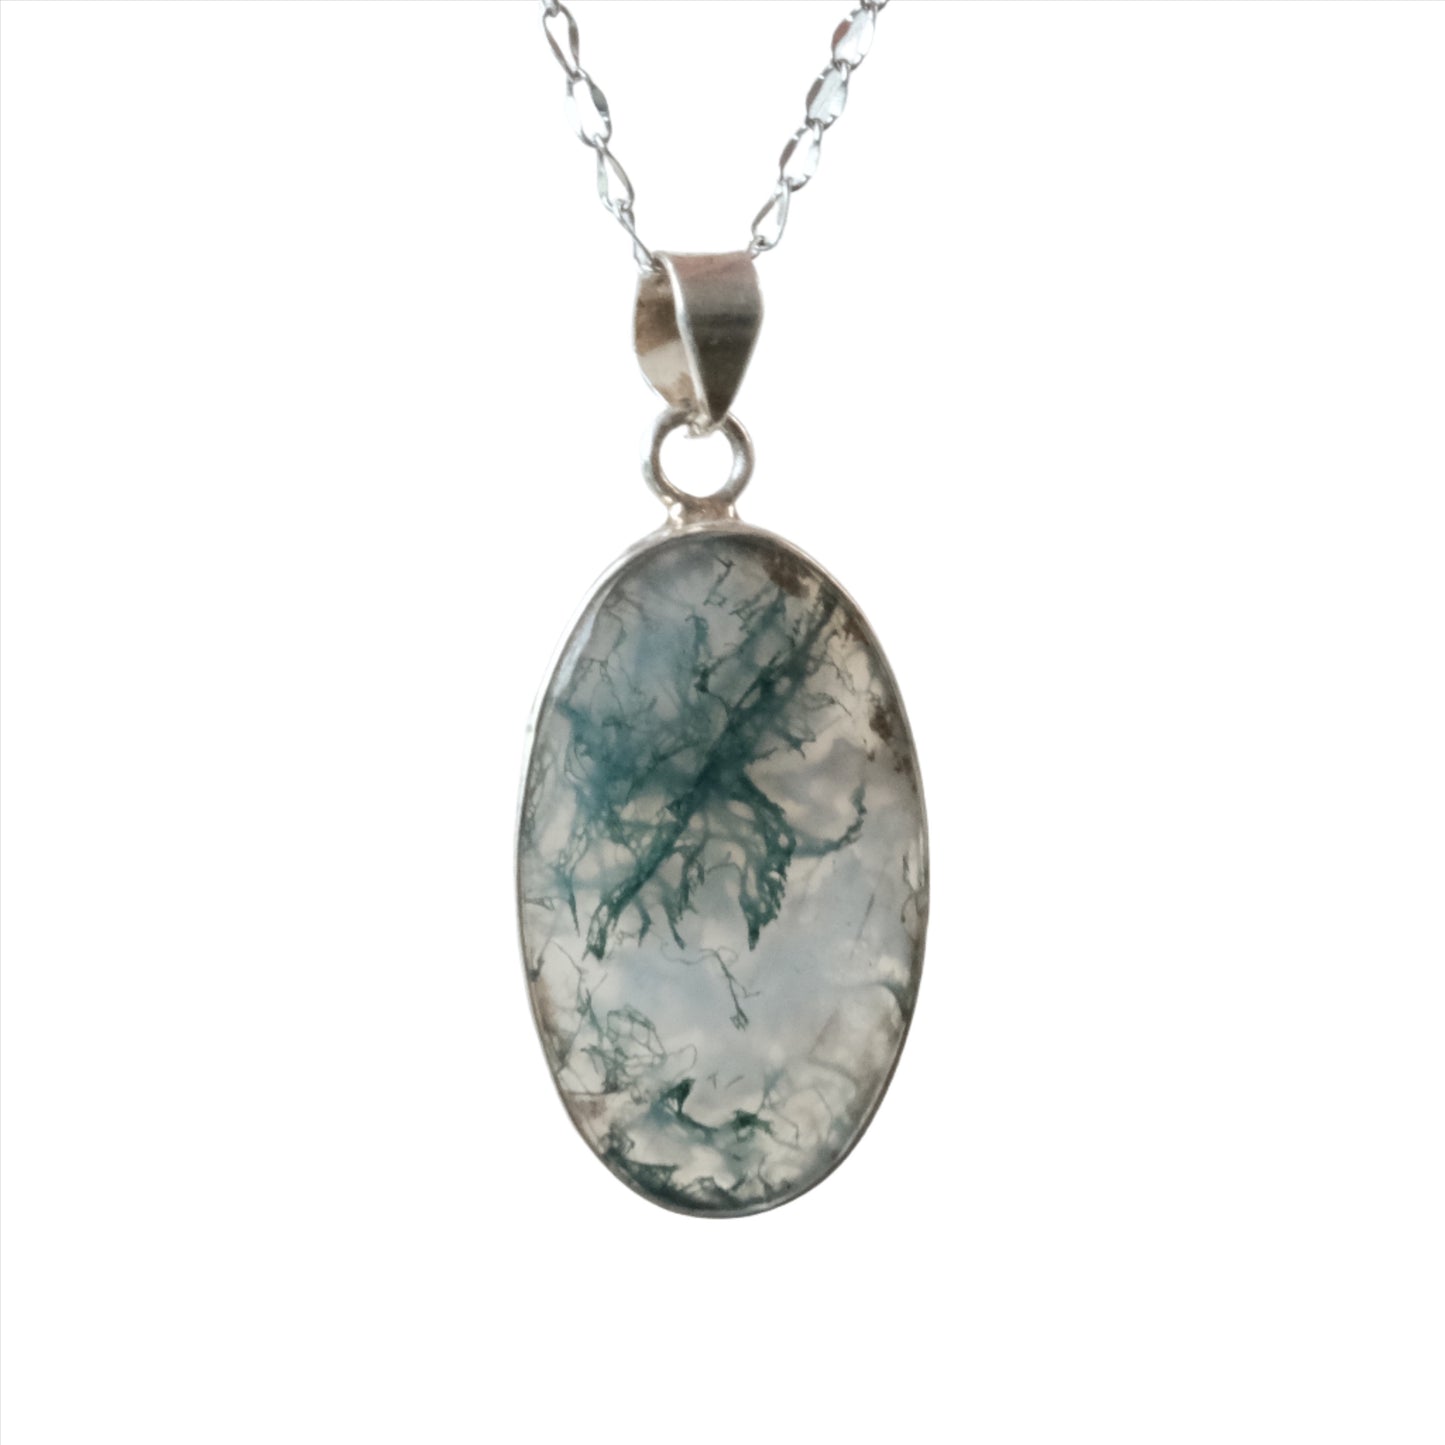 Moss Agate Oval Sterling Silver Pendant Necklace